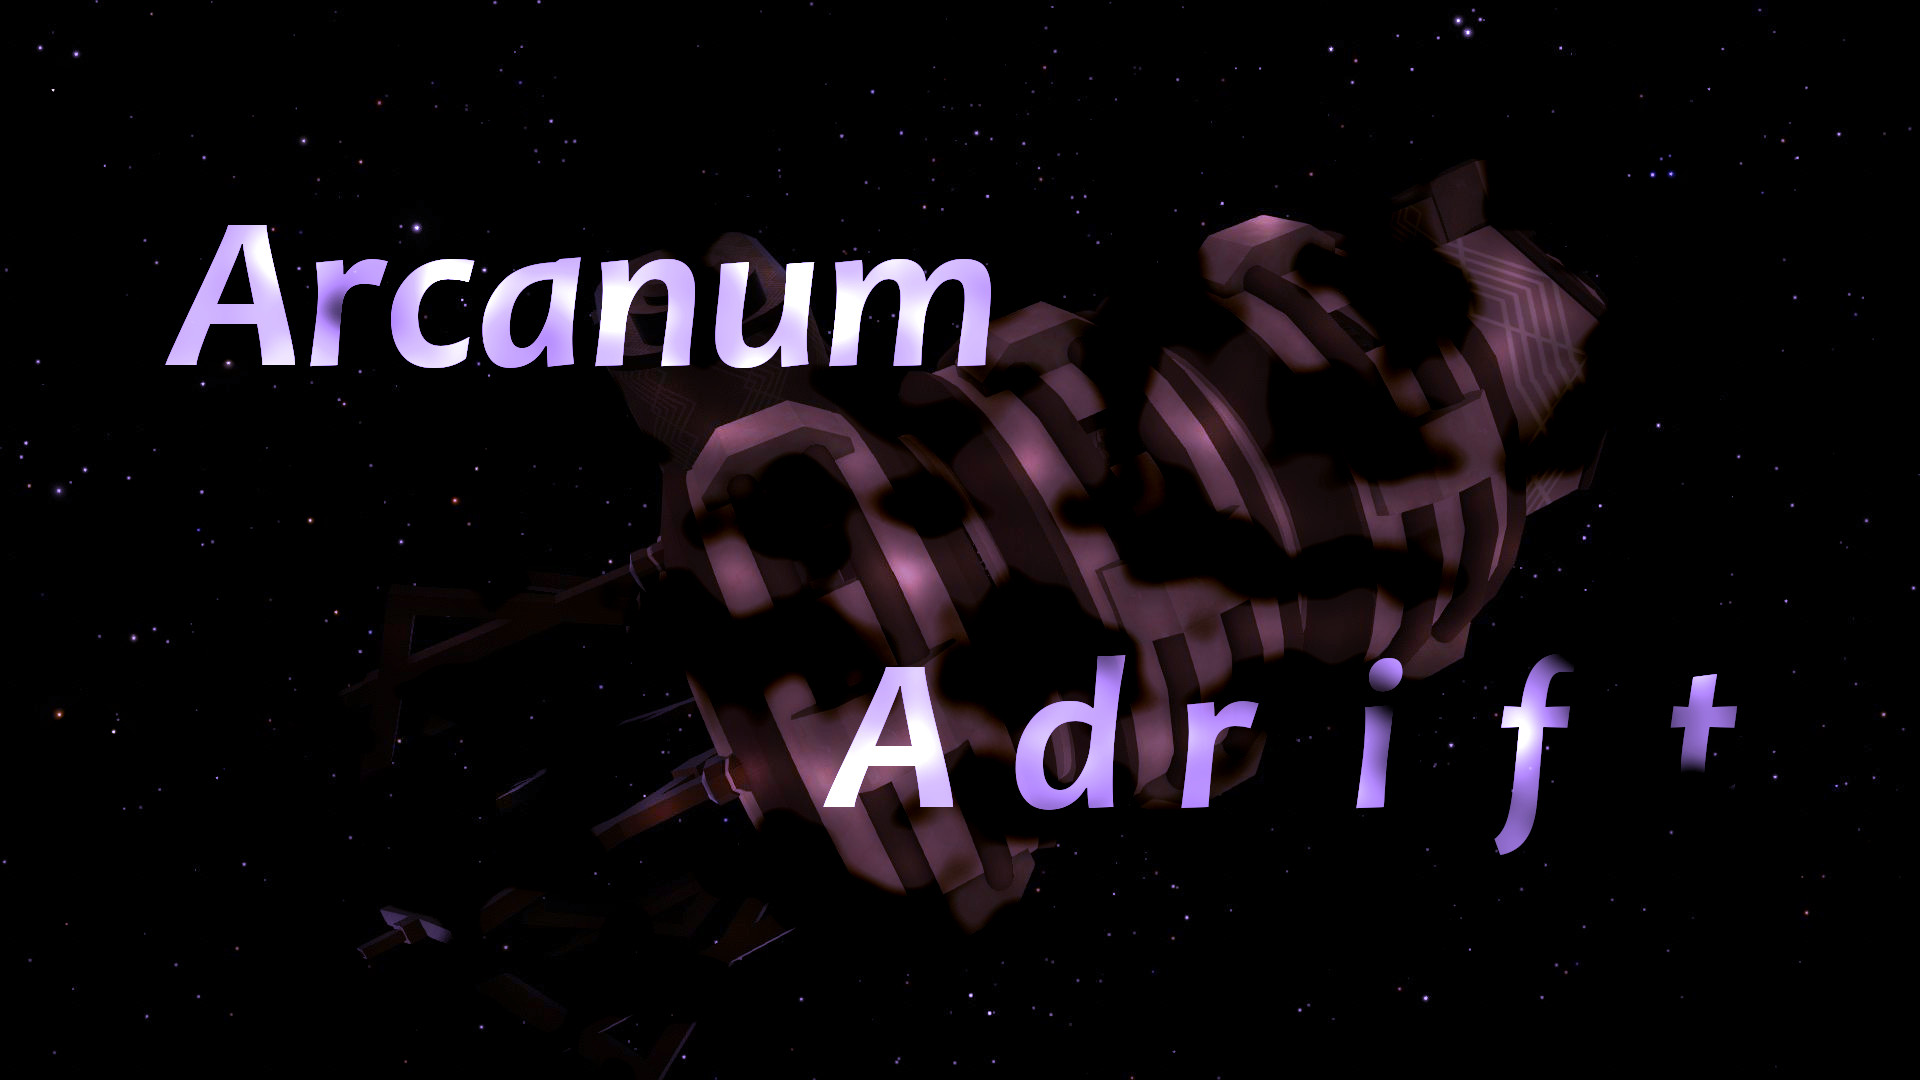 A screenshot with text overlaid that says &quot;Arcanum Adrift&quot;